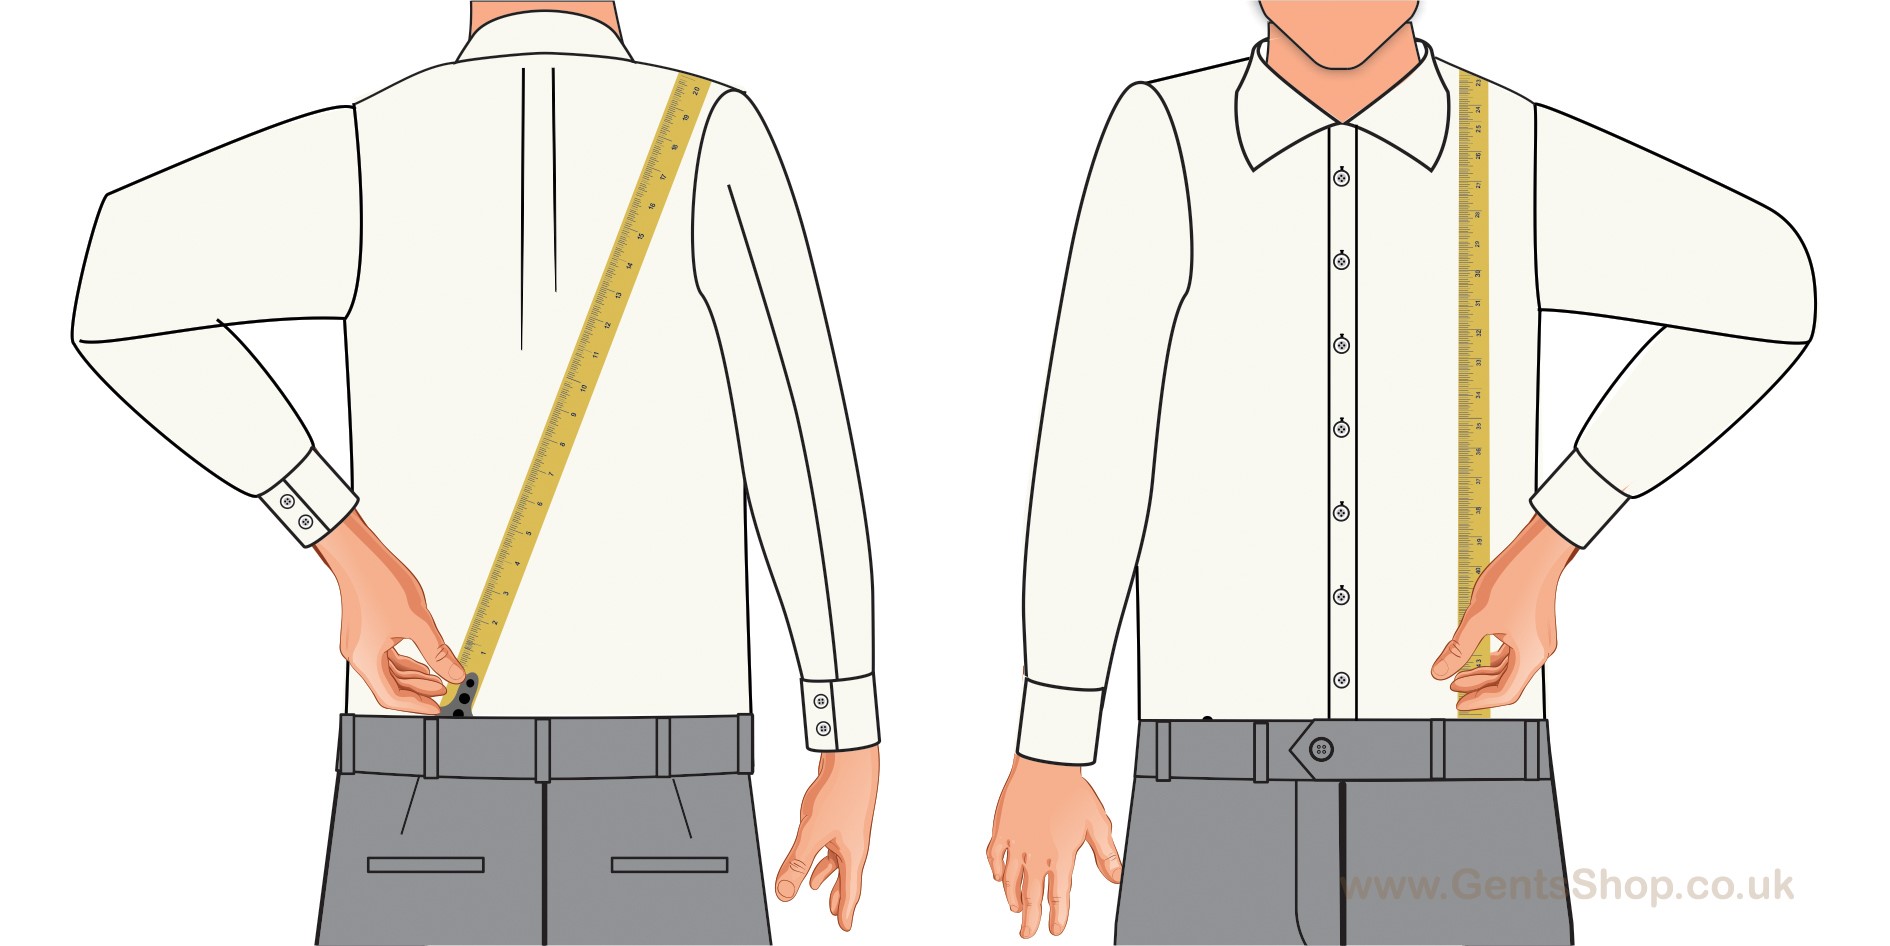 What Size Trouser Braces Do I Need? Braces size guide - Gents Shop